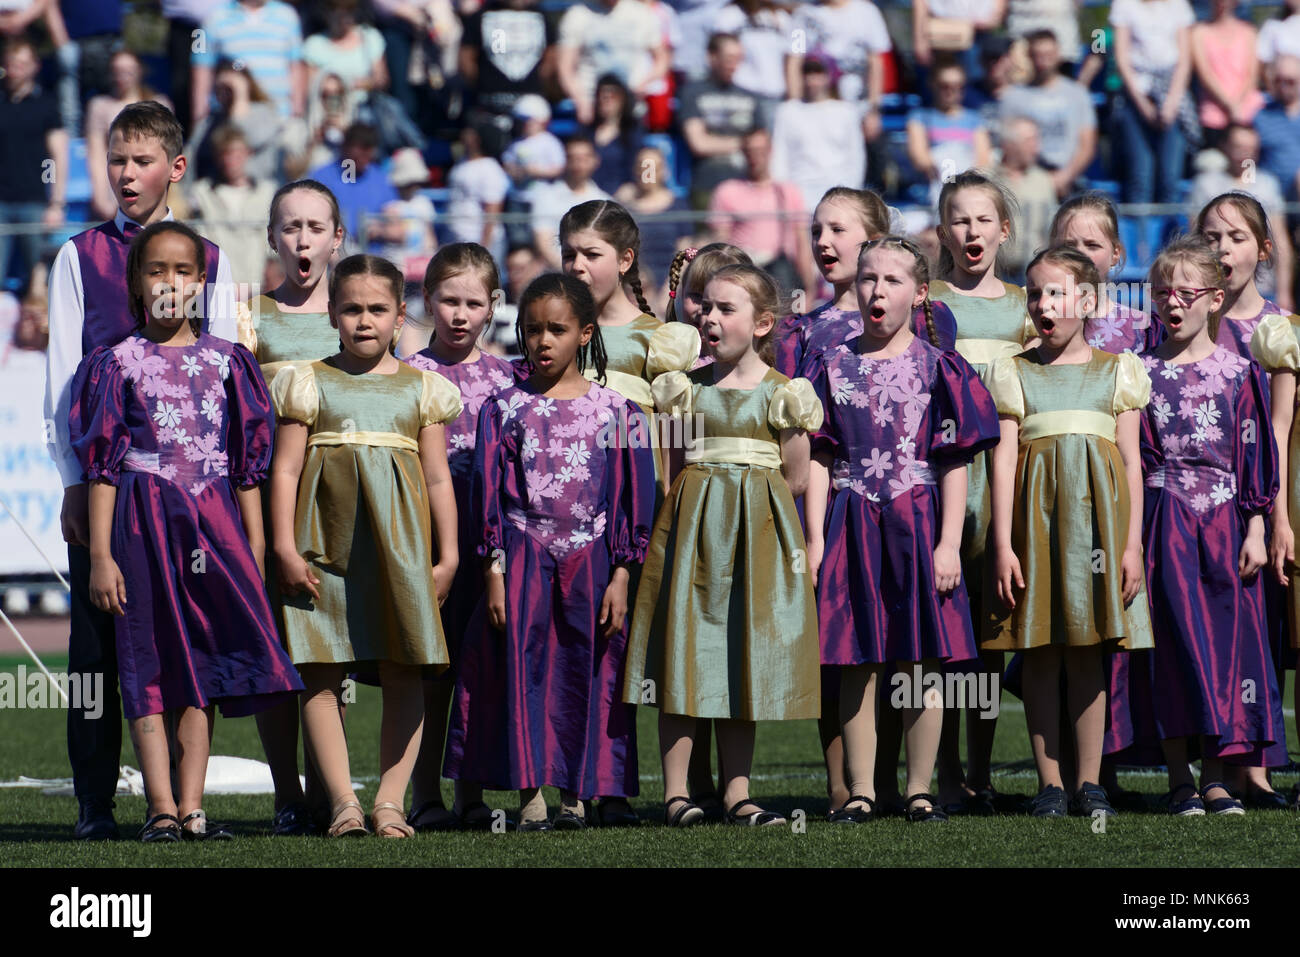 St. Petersburg, Russia - May 12, 2018: Children choir performs the anthem of Russia during opening ceremony of Rugby Europe Sevens Club Champion's Tro Stock Photo